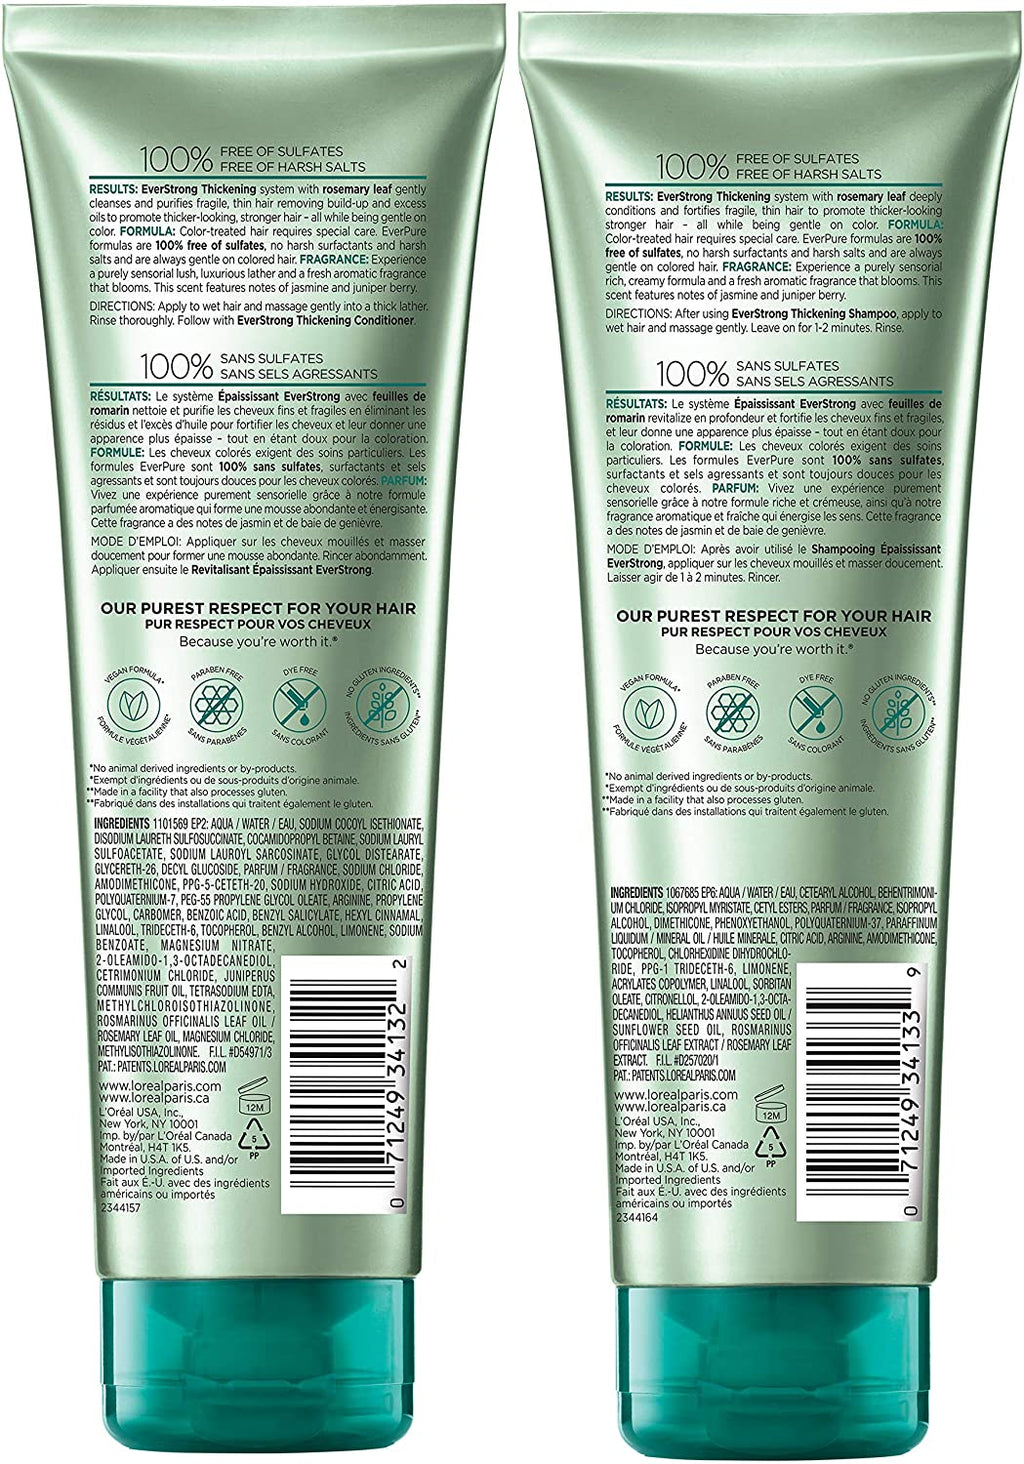 L'Oreal Paris EverStrong Thickening Sulfate Free Conditioner, Shampoo